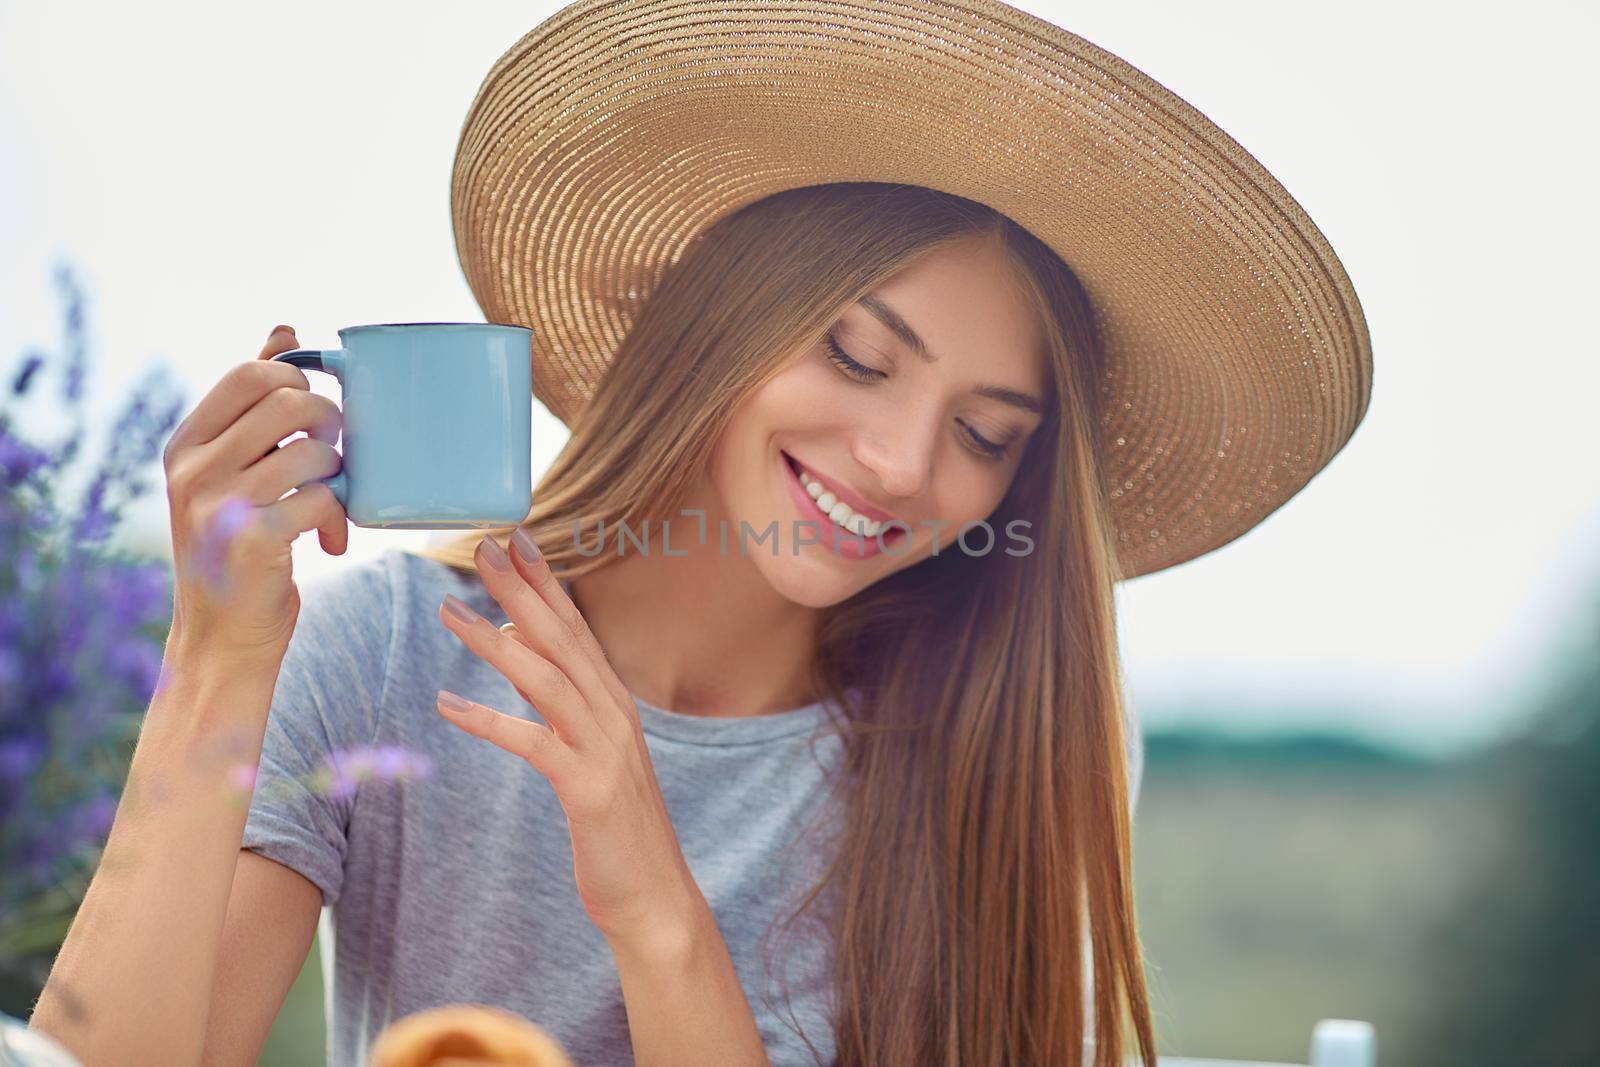 Selective focus of young girl wearing big straw hat and dress holding hot drink outdoors. Stunning caucasian woman drinking coffee, posing in lavender field. Concept of beauty, nature, drink.